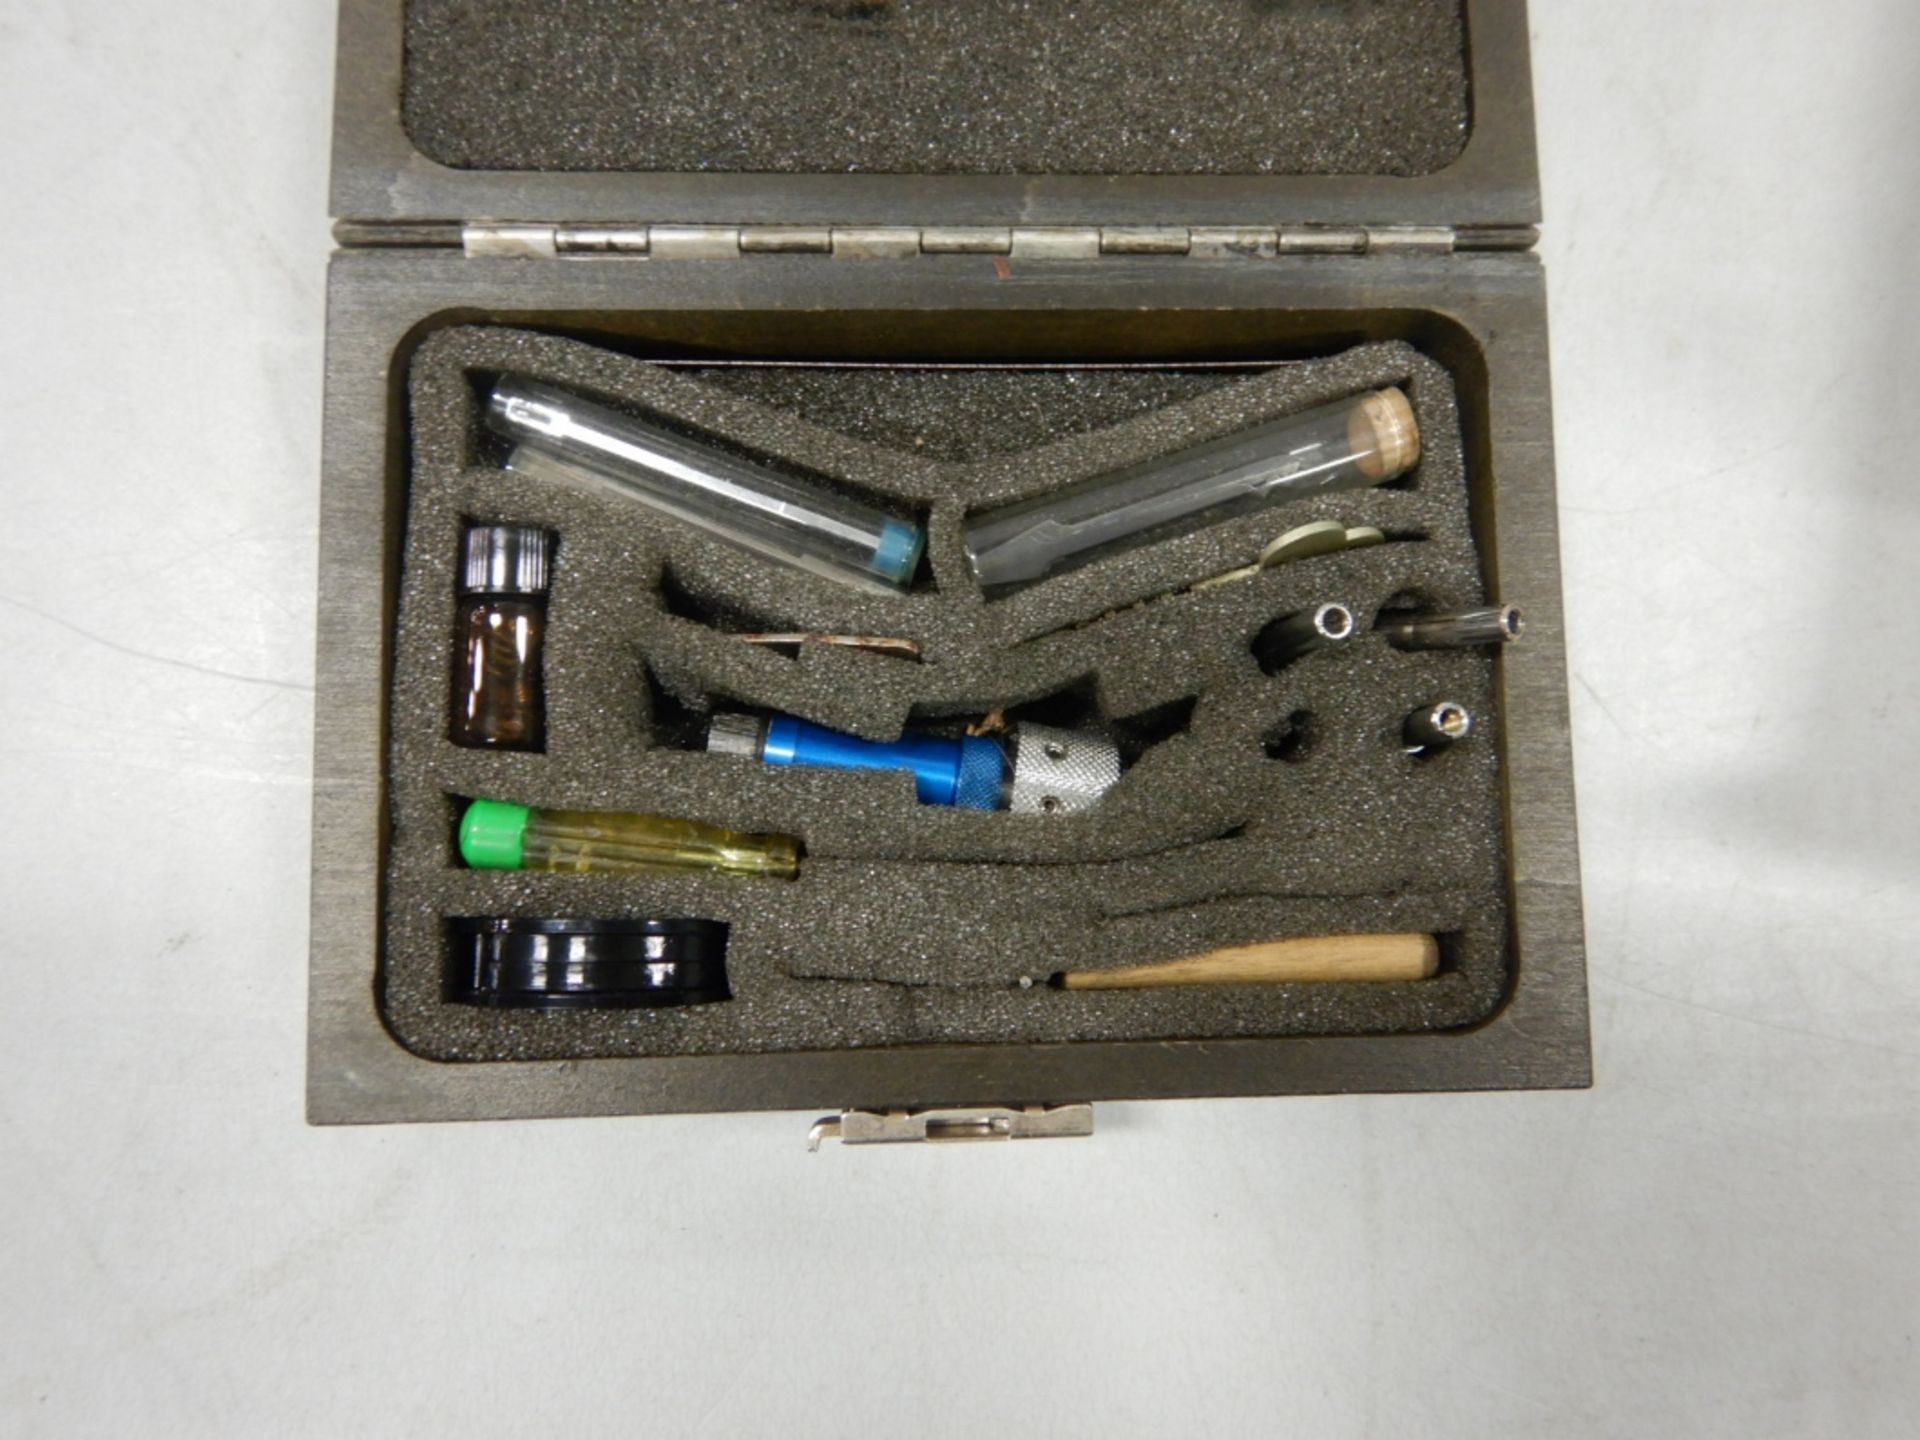 PICKMASTERS KIT, CYLINDER THREADING TOOL, "DO NOT COPY" STAMP TOOL, MATRICOLA 1907011980502 KIT - Image 7 of 7